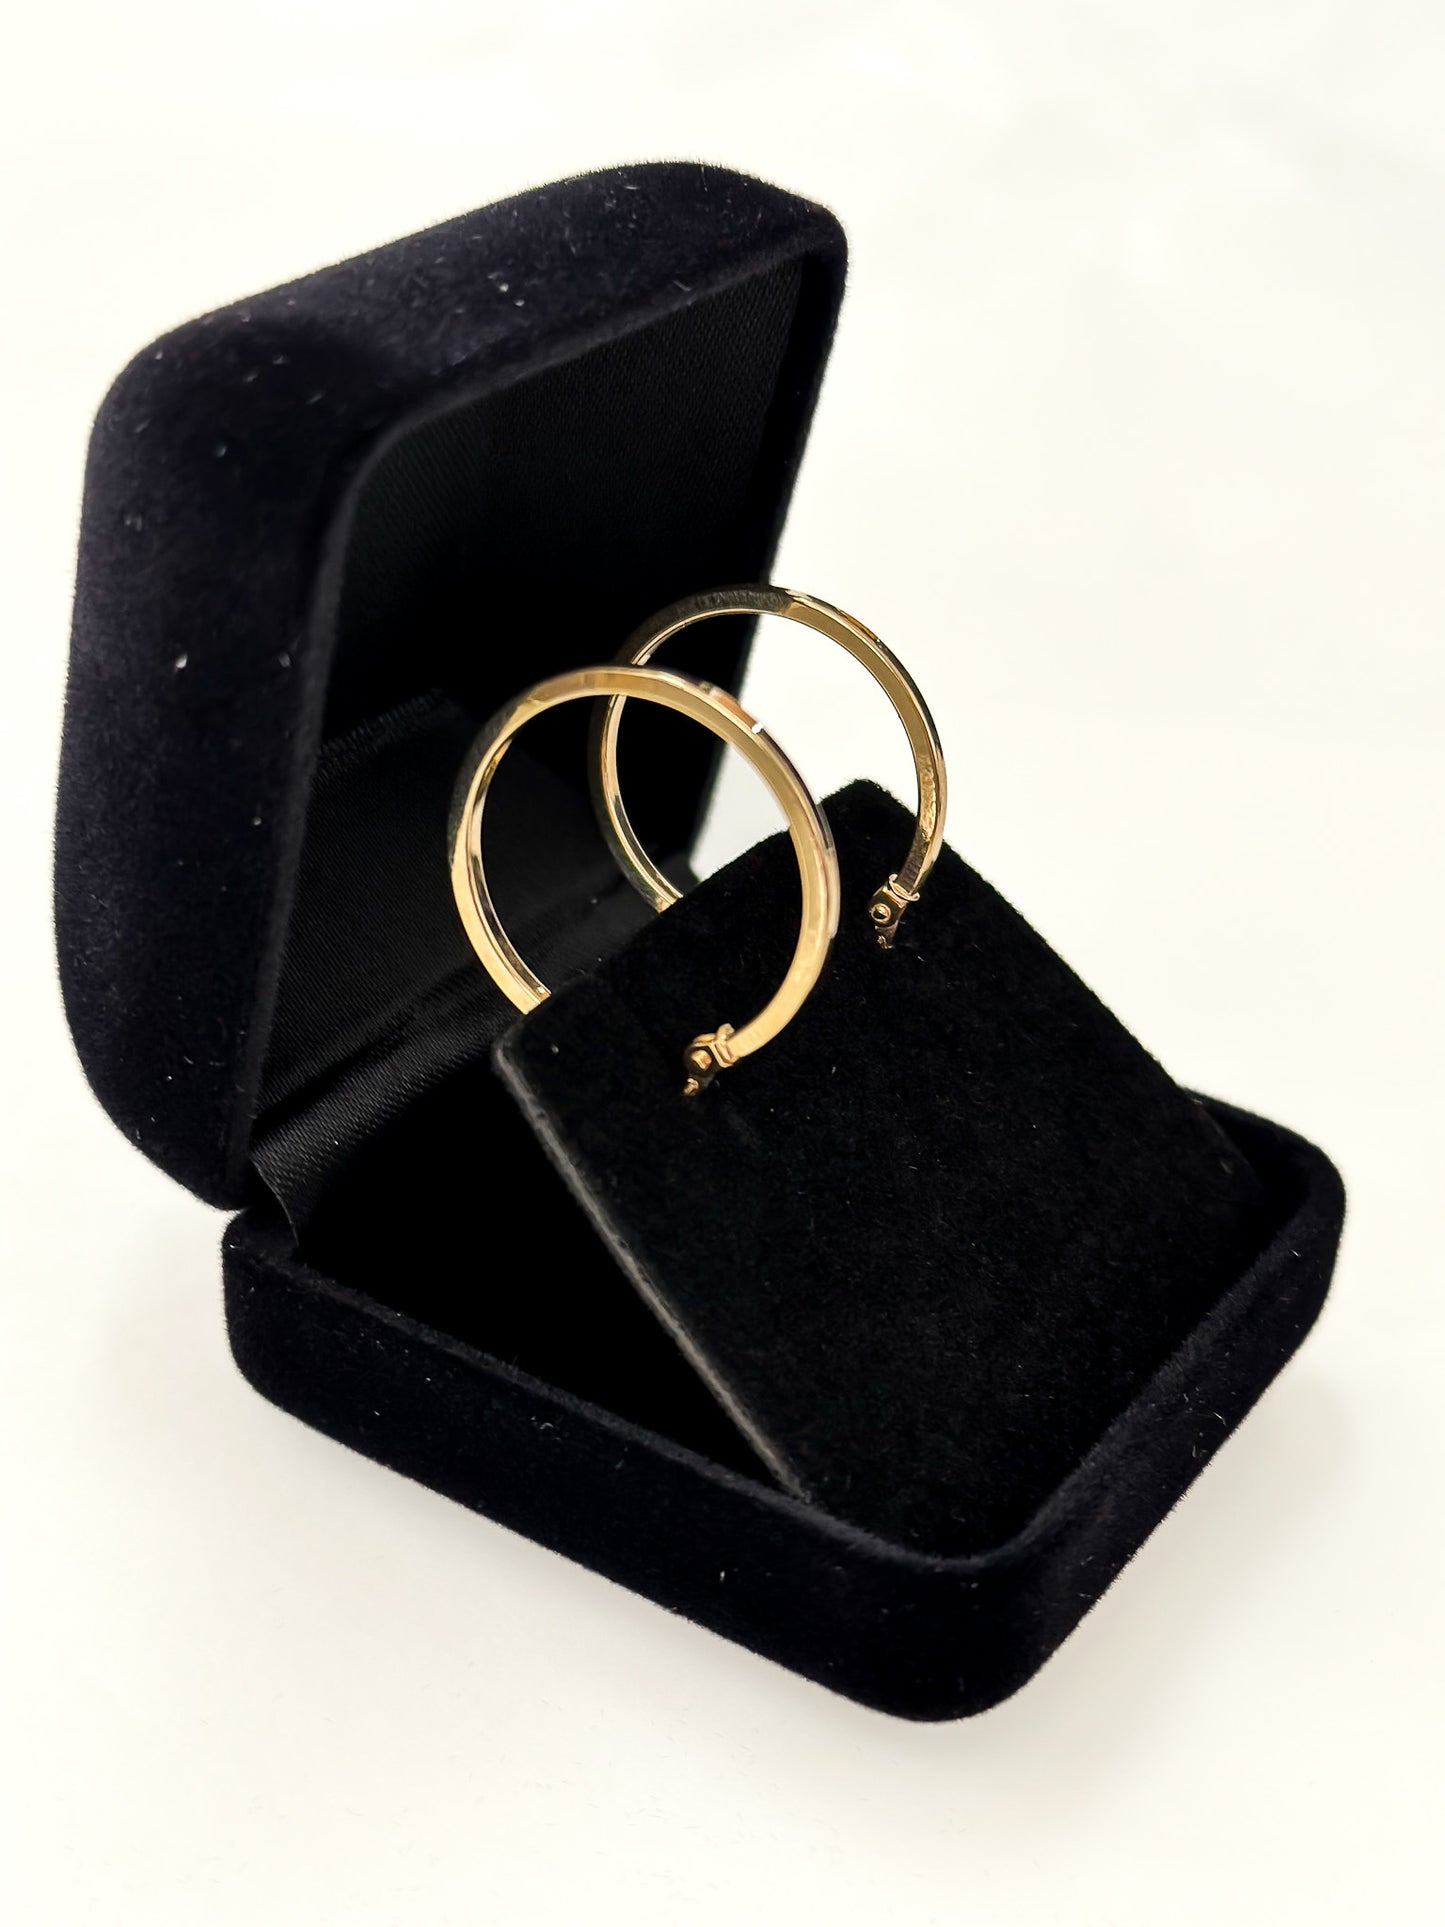 LORNE 9ct Yellow Gold 20mm Hoop Earring—a minimalist's dream of clean lines and reflective surfaces.